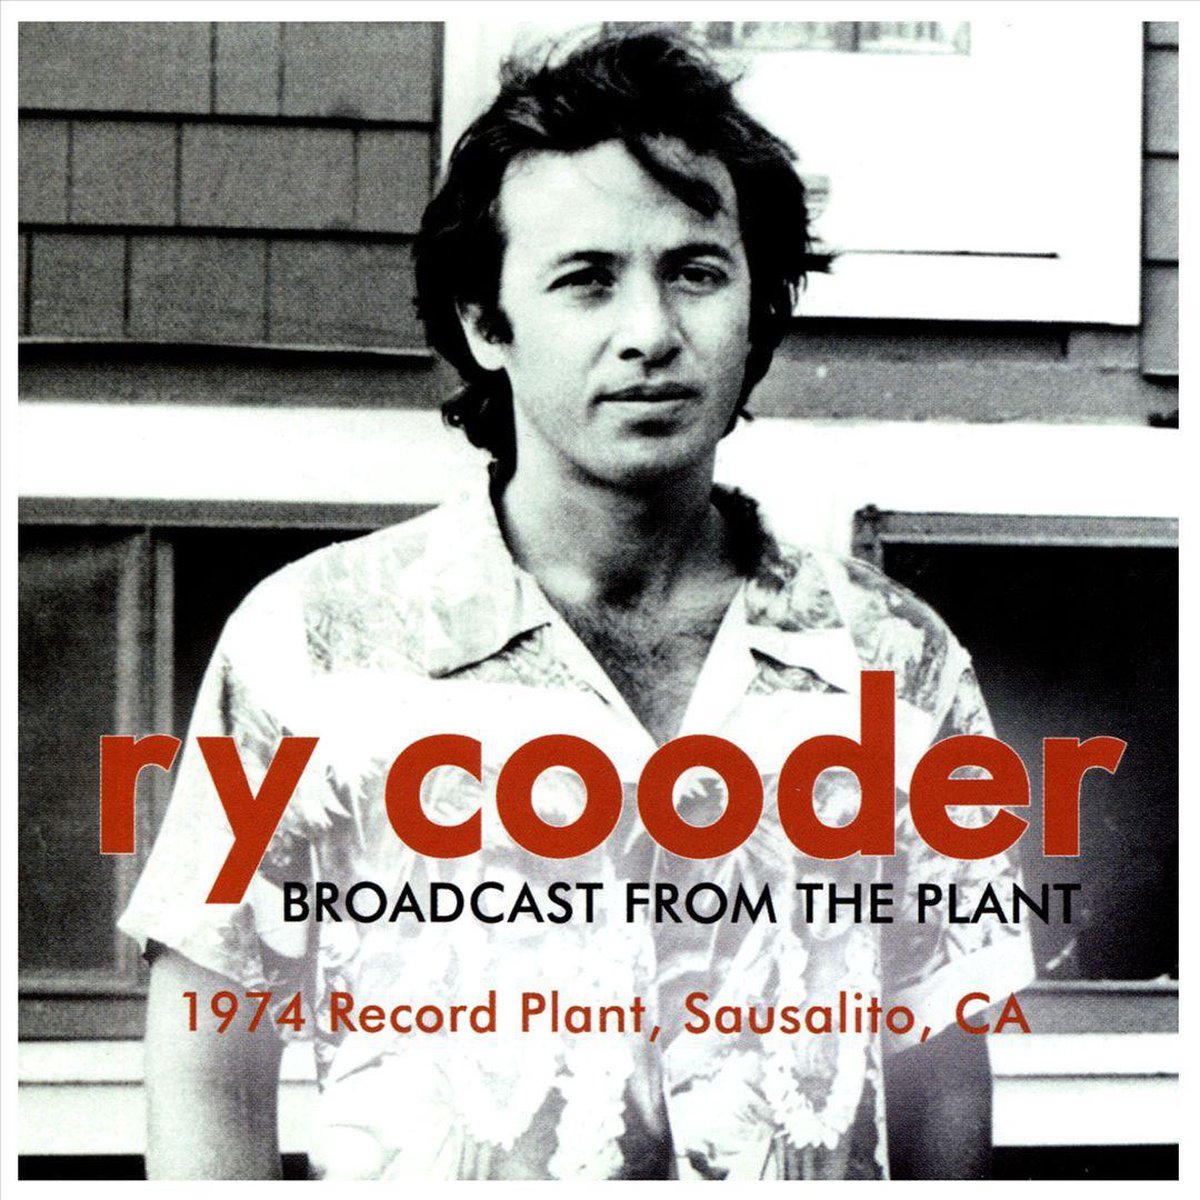 Broadcast from the Plant - Ry Cooder